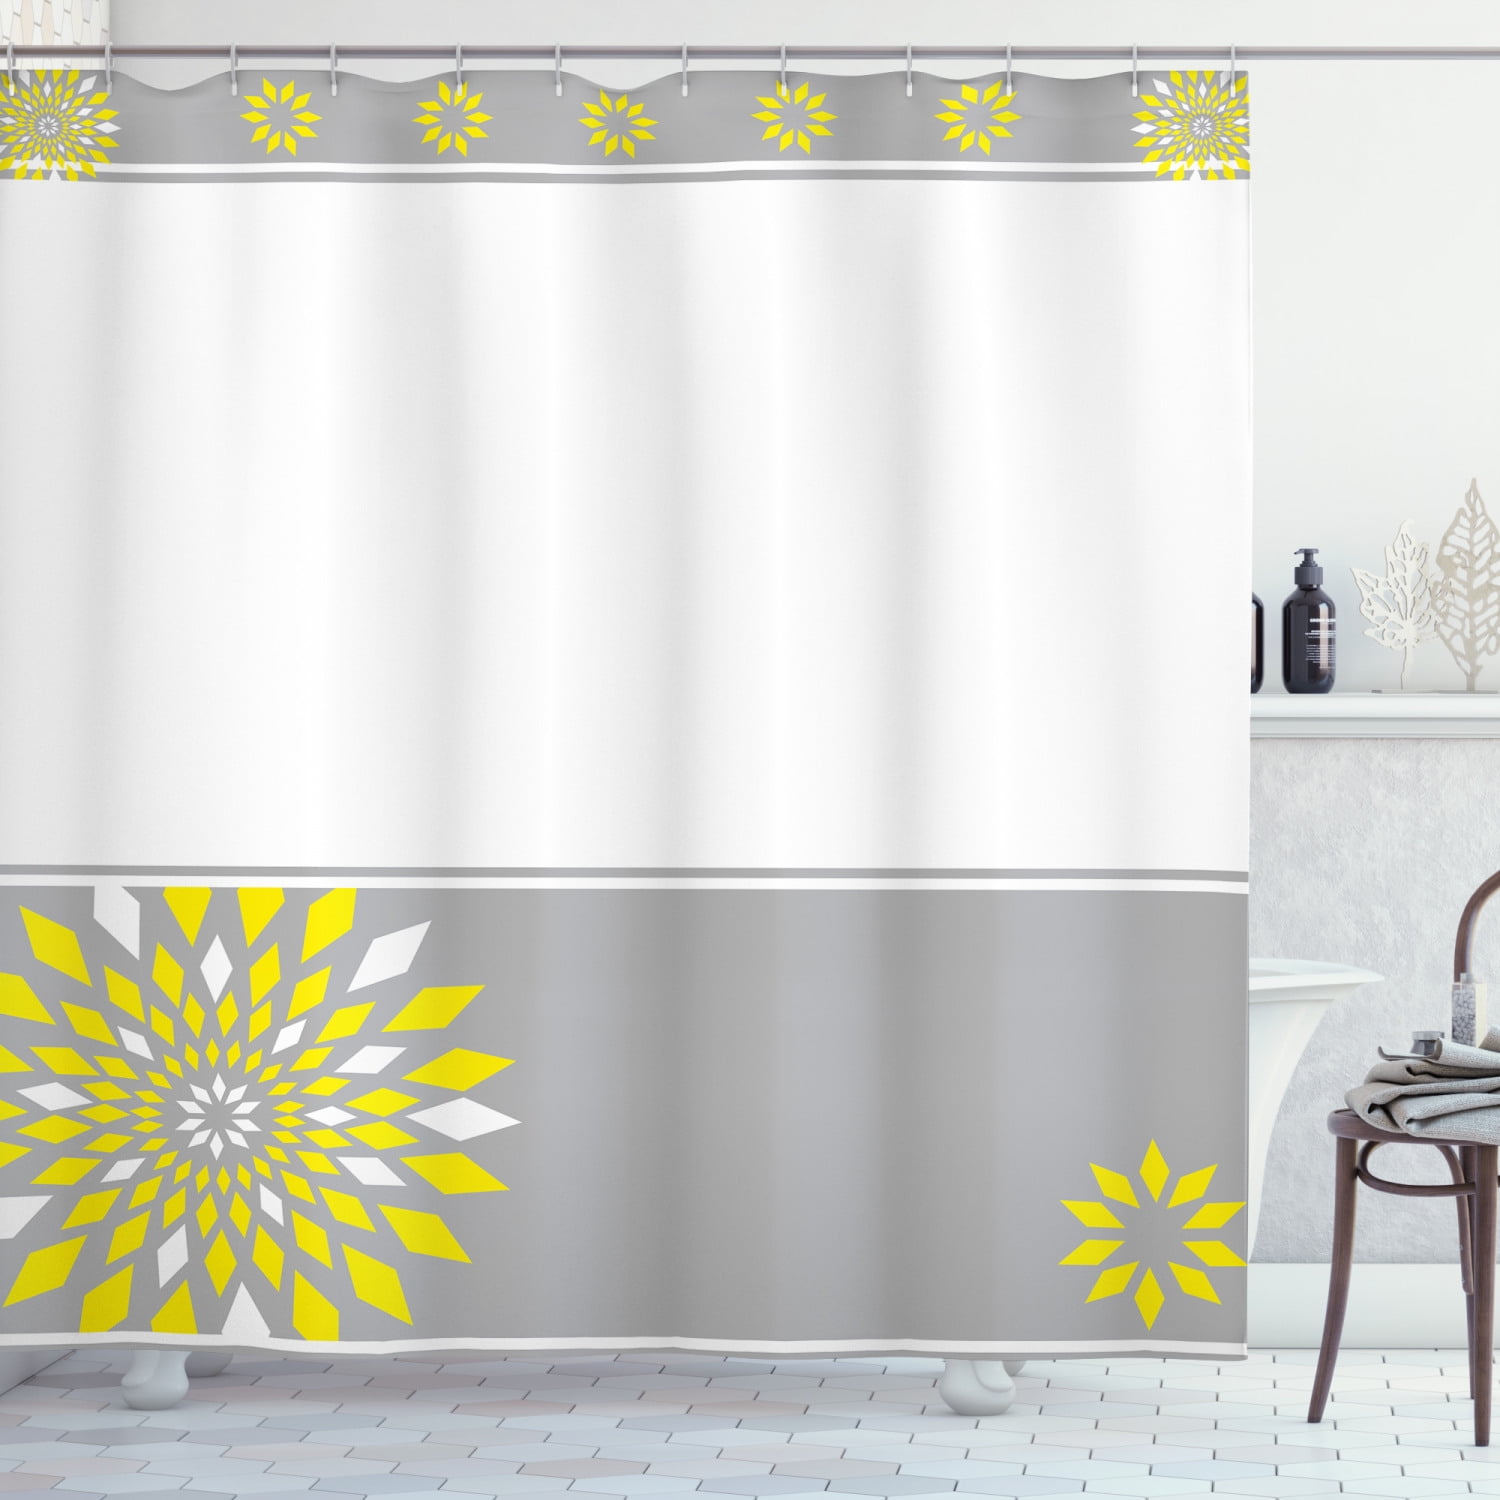 Details about   Waterproof Shower Curtain Geometric Printed Polyester Fabric Bathroom Curtains 